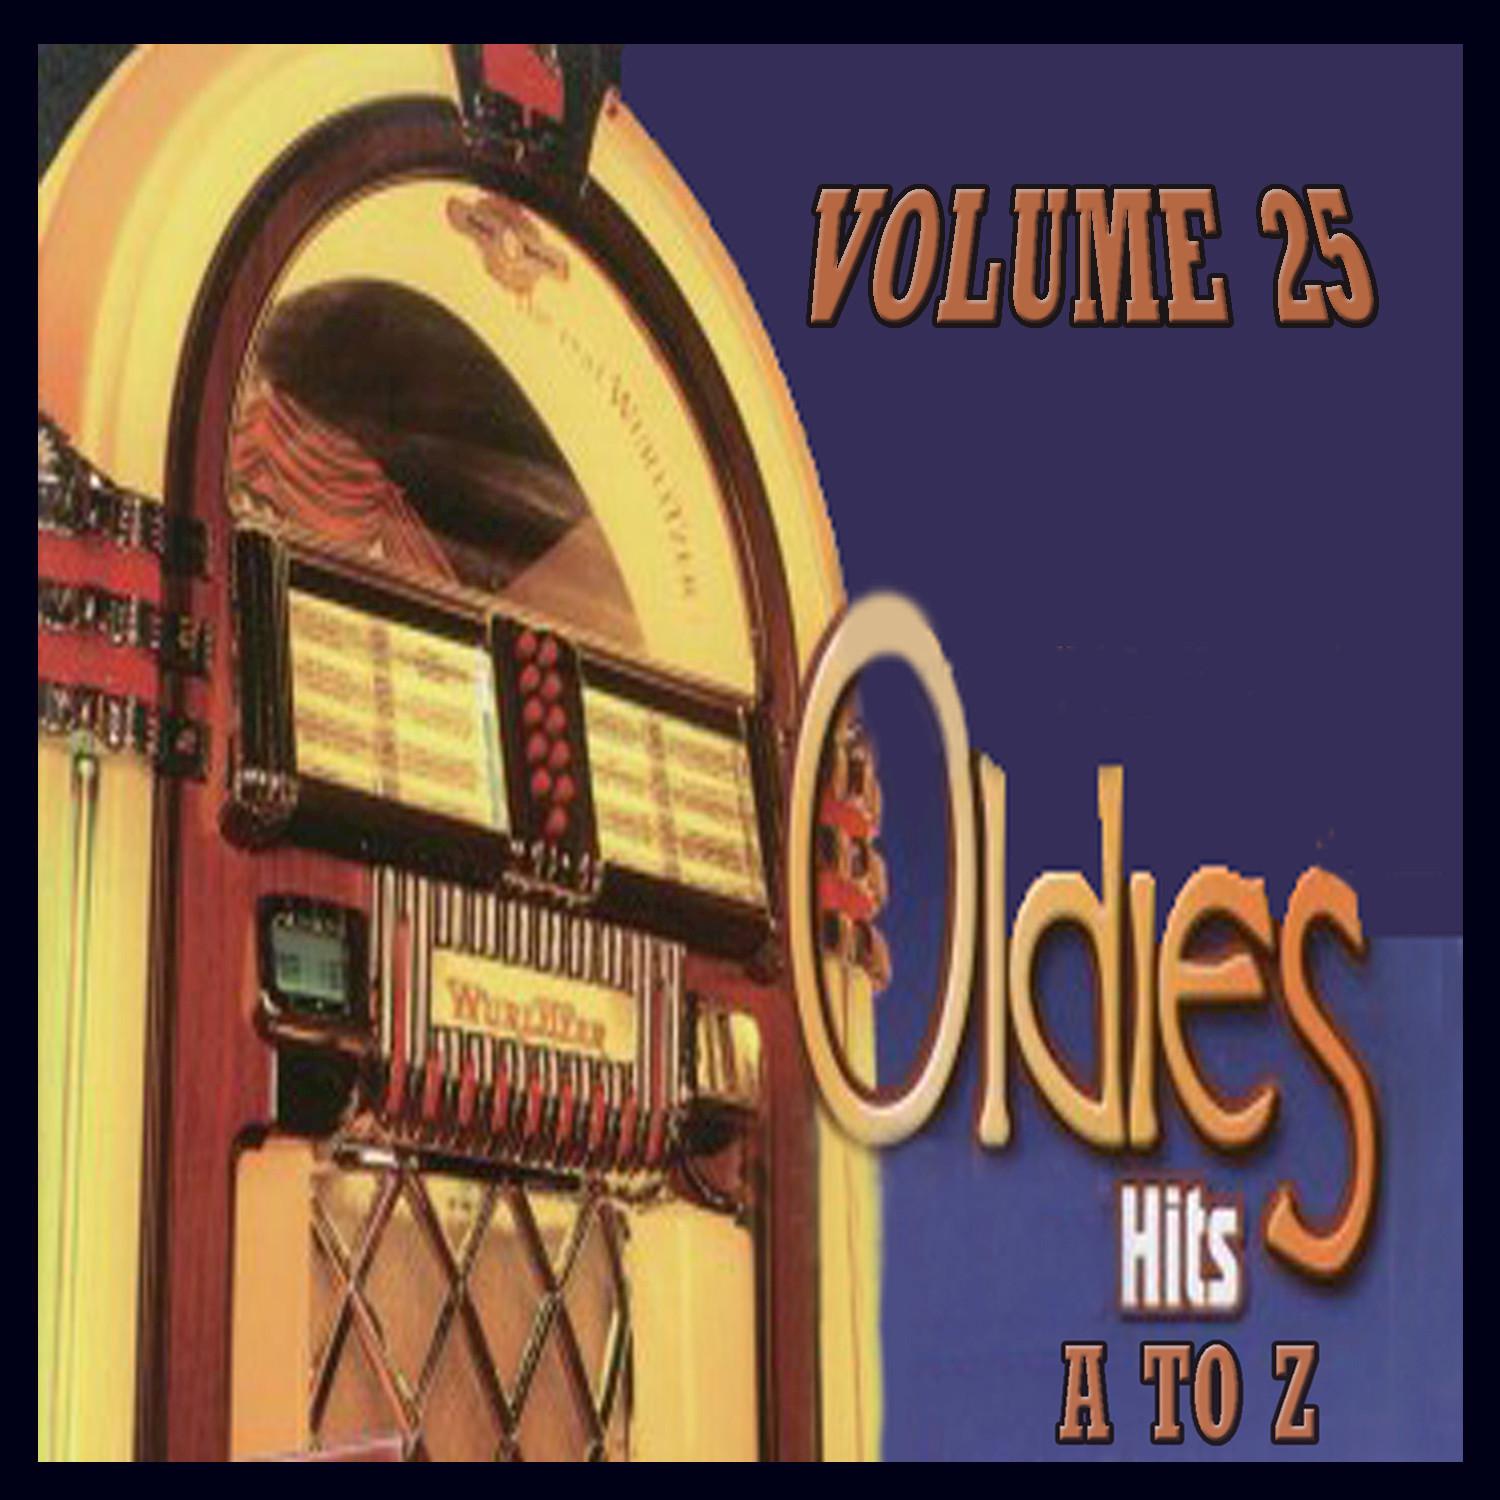 Oldies Hits A to Z, Vol. 25